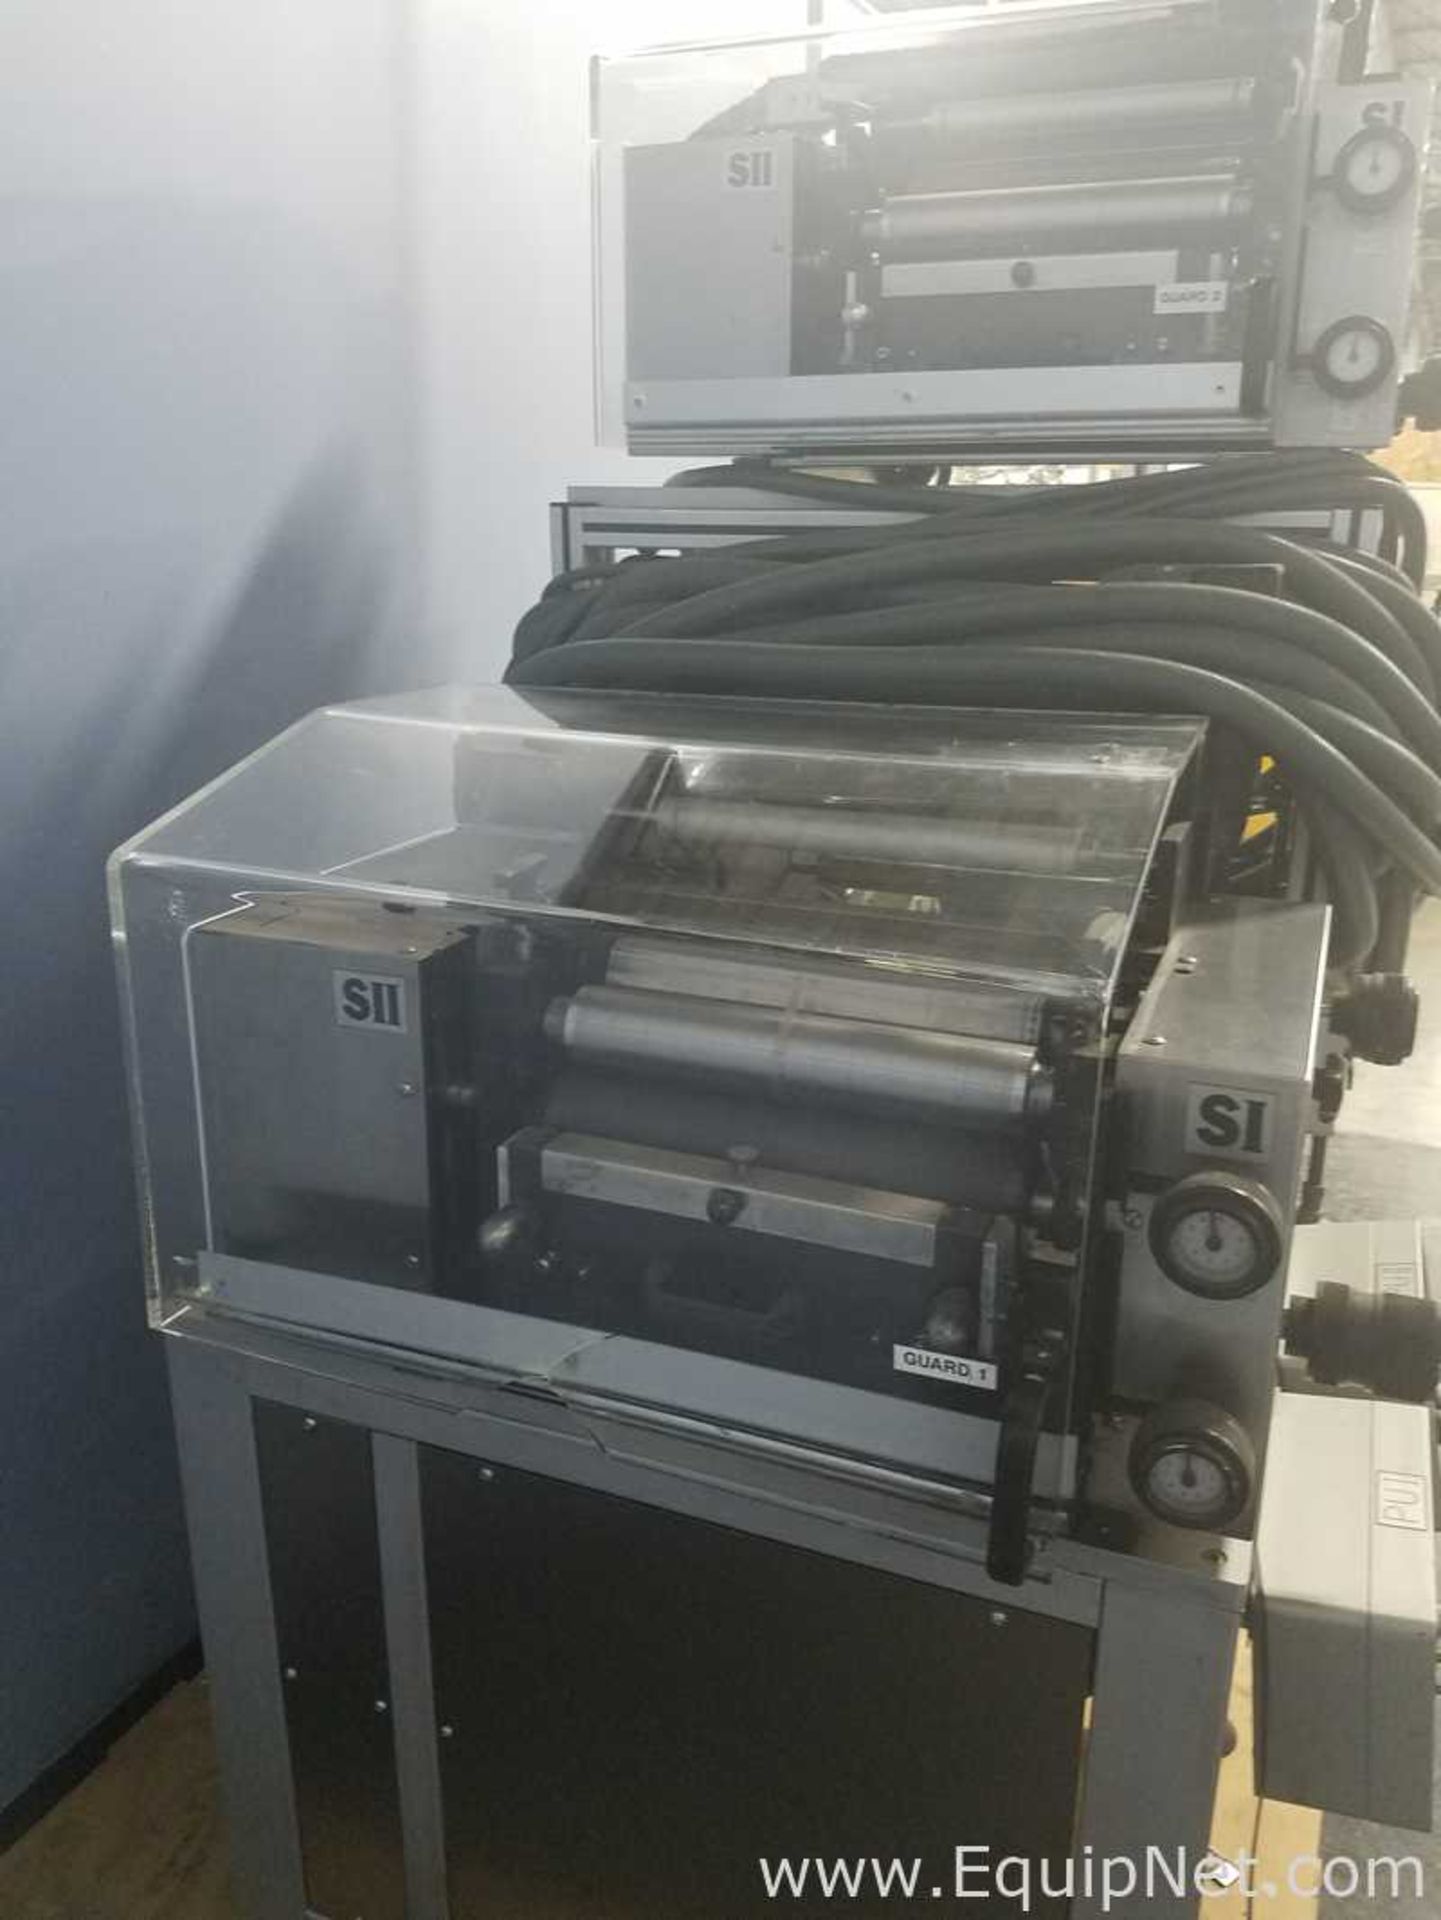 EQUIPNET LISTING #649374; REMOVAL COST: $20; MODEL: inPRINT 310; DESCRIPTION: Metronic inPRINT 310 - Image 8 of 13